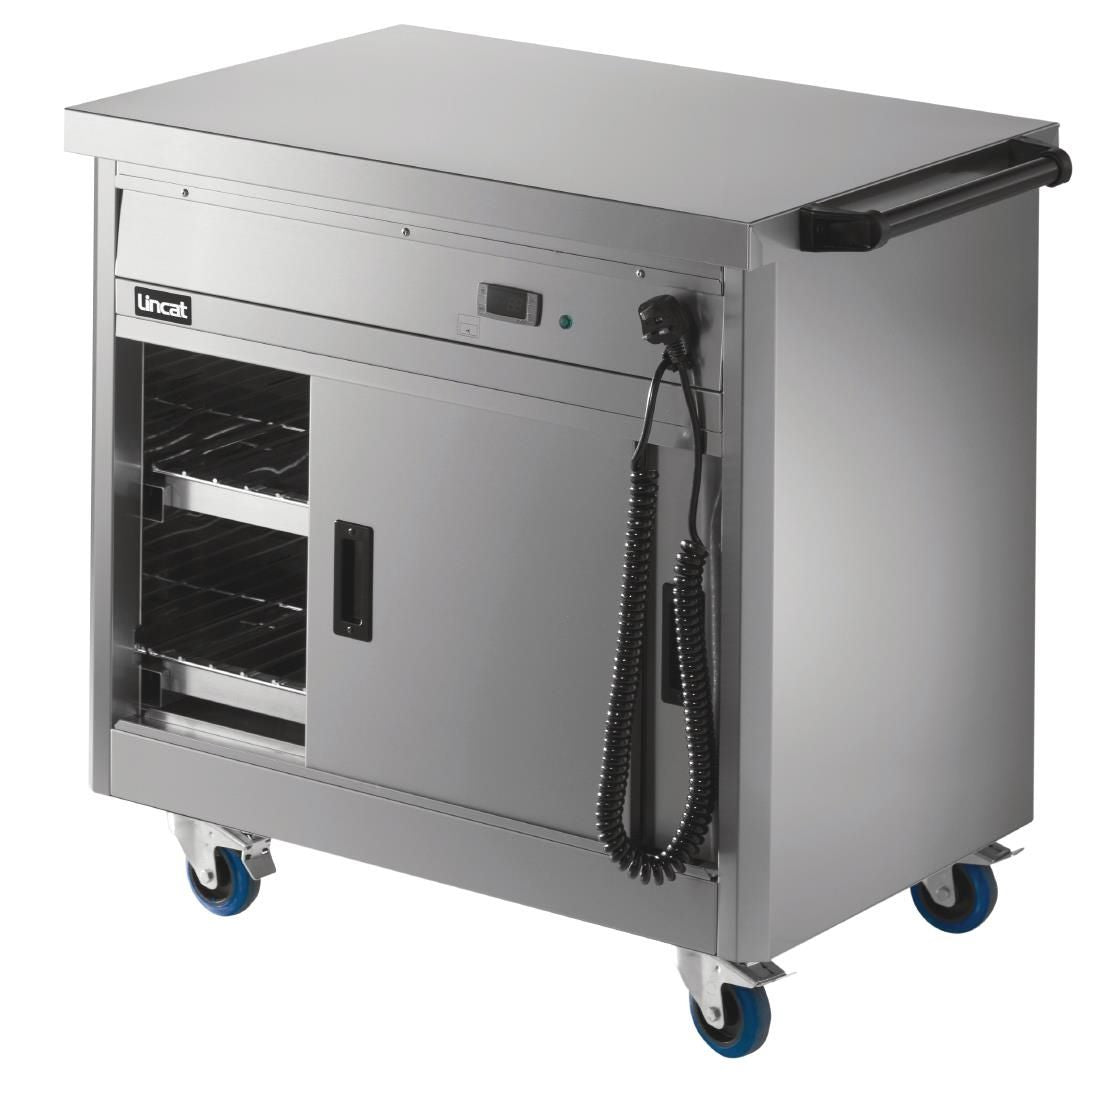 GJ570 Lincat Panther 670 Series Hot Cupboard with Plain tops P6P2 JD Catering Equipment Solutions Ltd